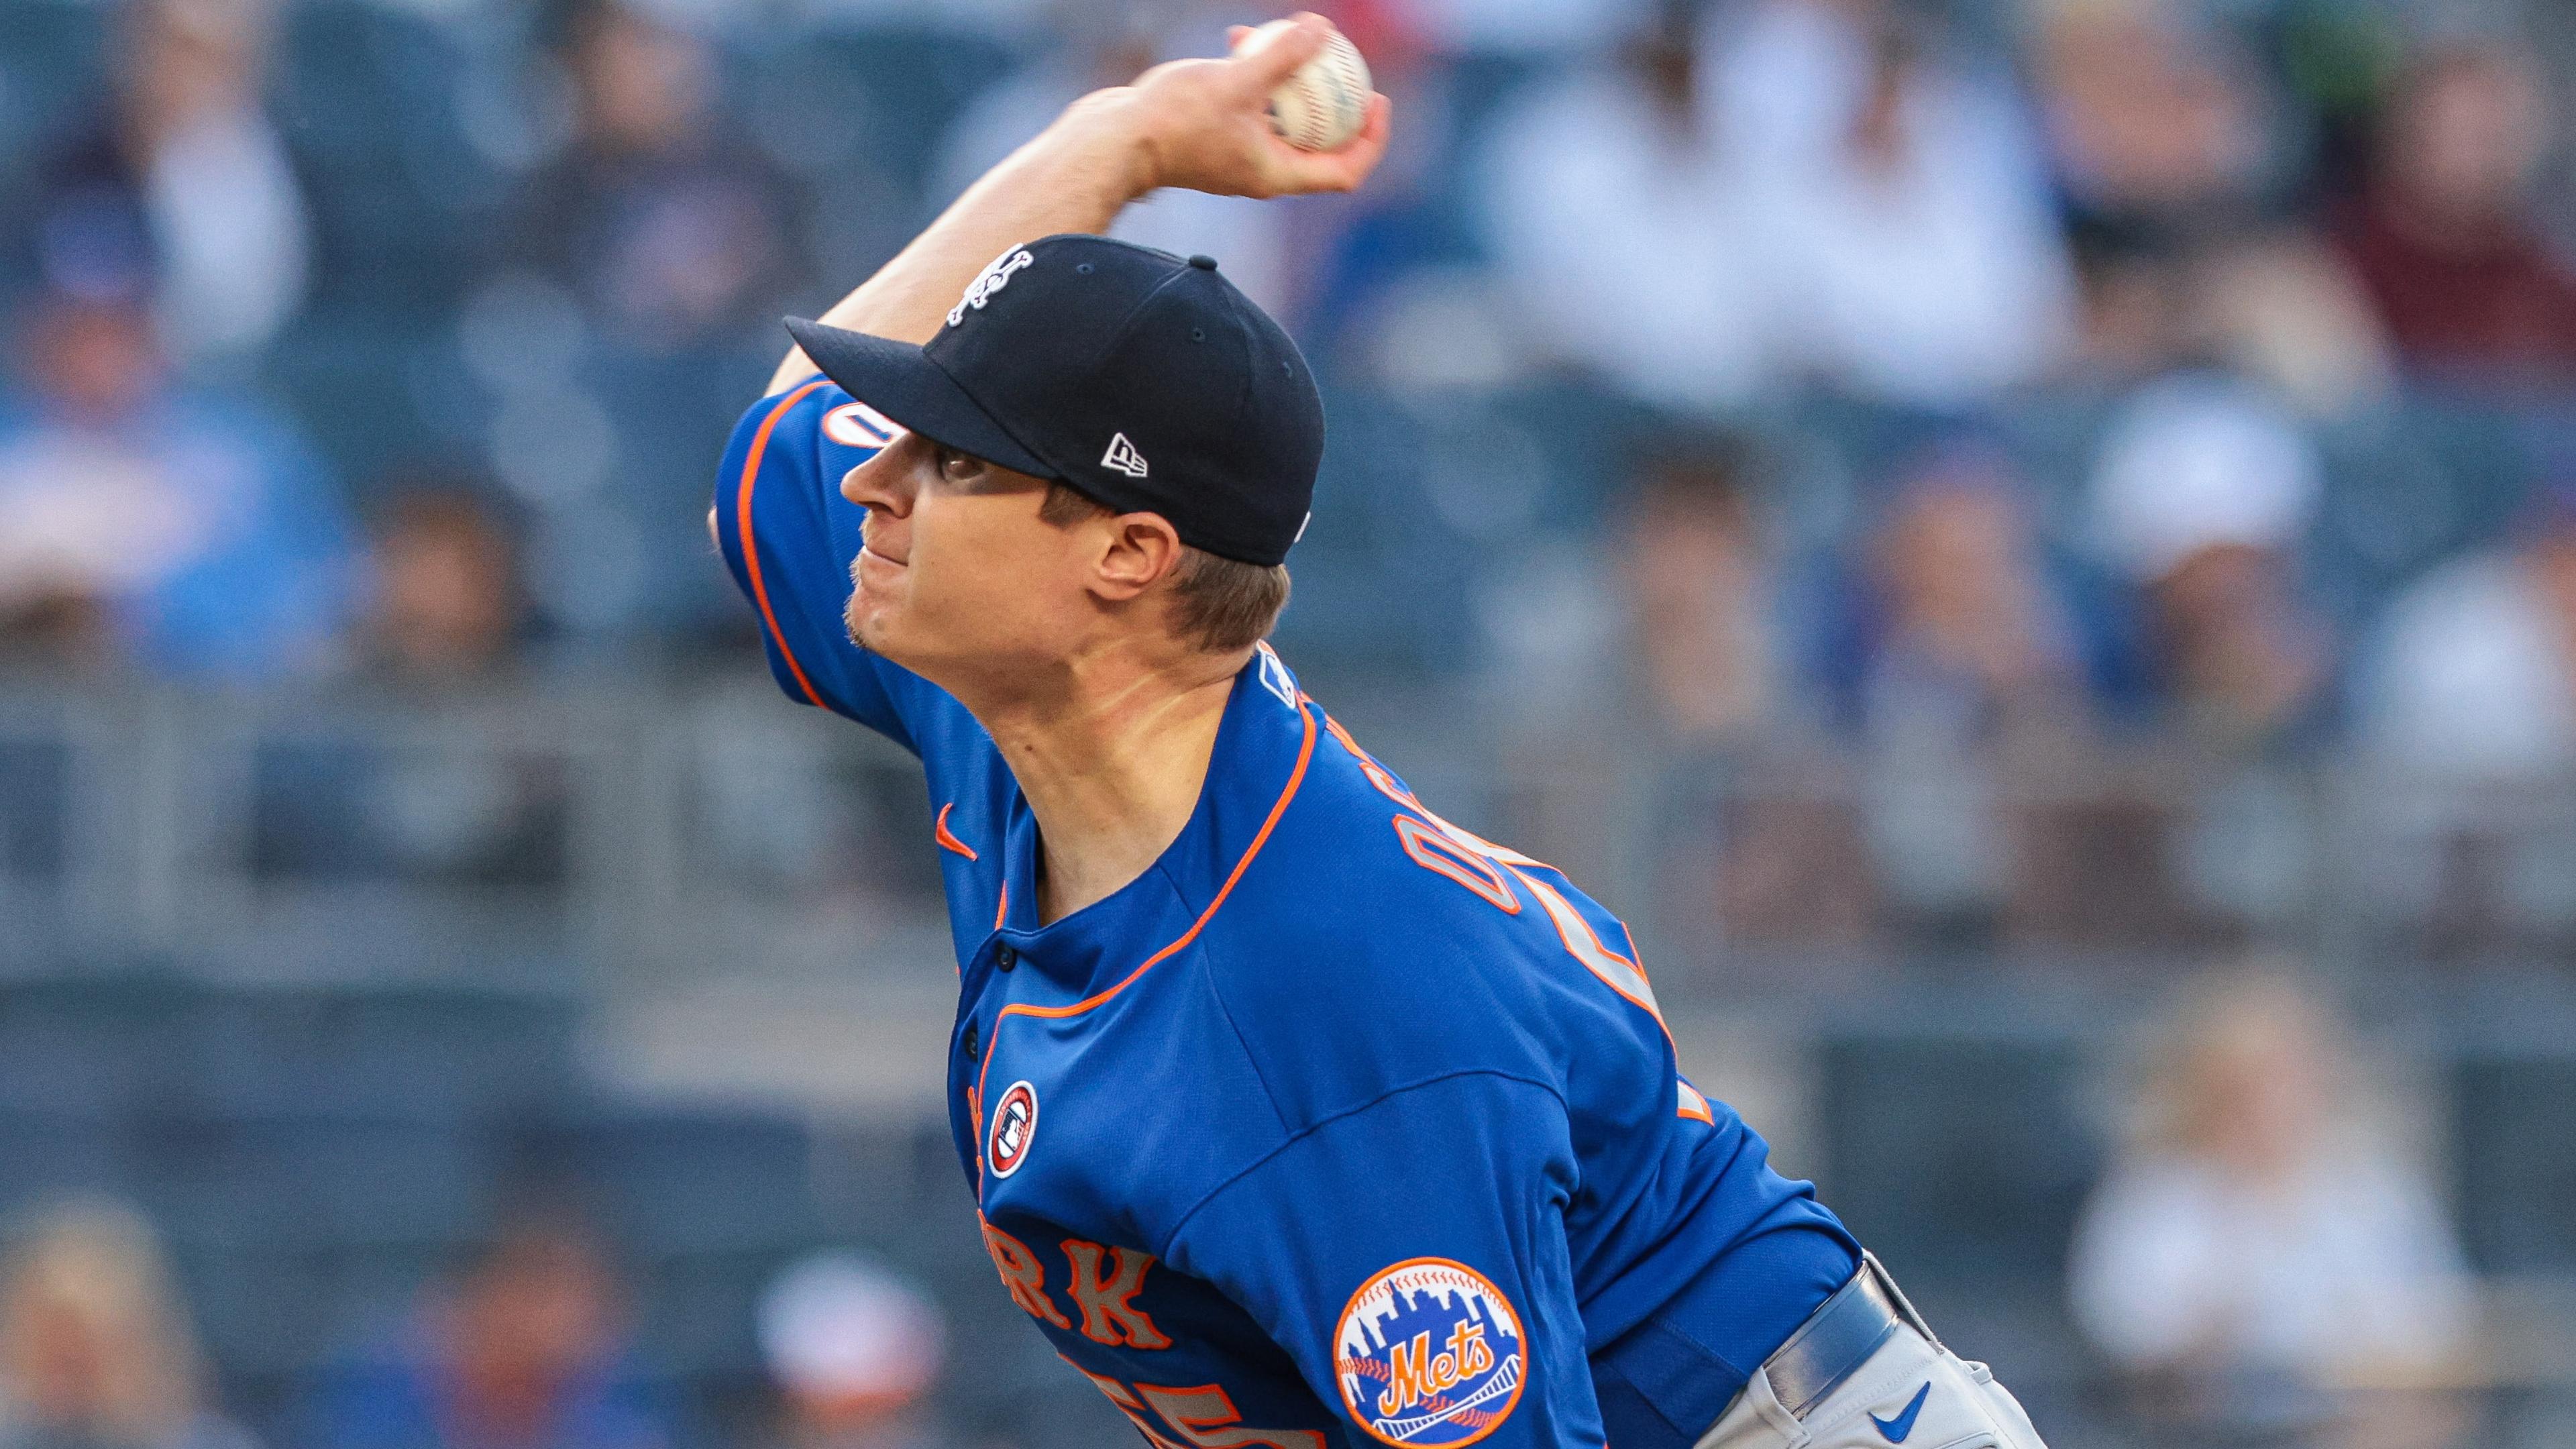 Jul 4, 2021; Bronx, New York, USA; New York Mets relief pitcher Corey Oswalt (55) delivers a pitch during the first inning against the New York Yankees at Yankee Stadium. Mandatory Credit: Vincent Carchietta-USA TODAY Sports / © Vincent Carchietta-USA TODAY Sports